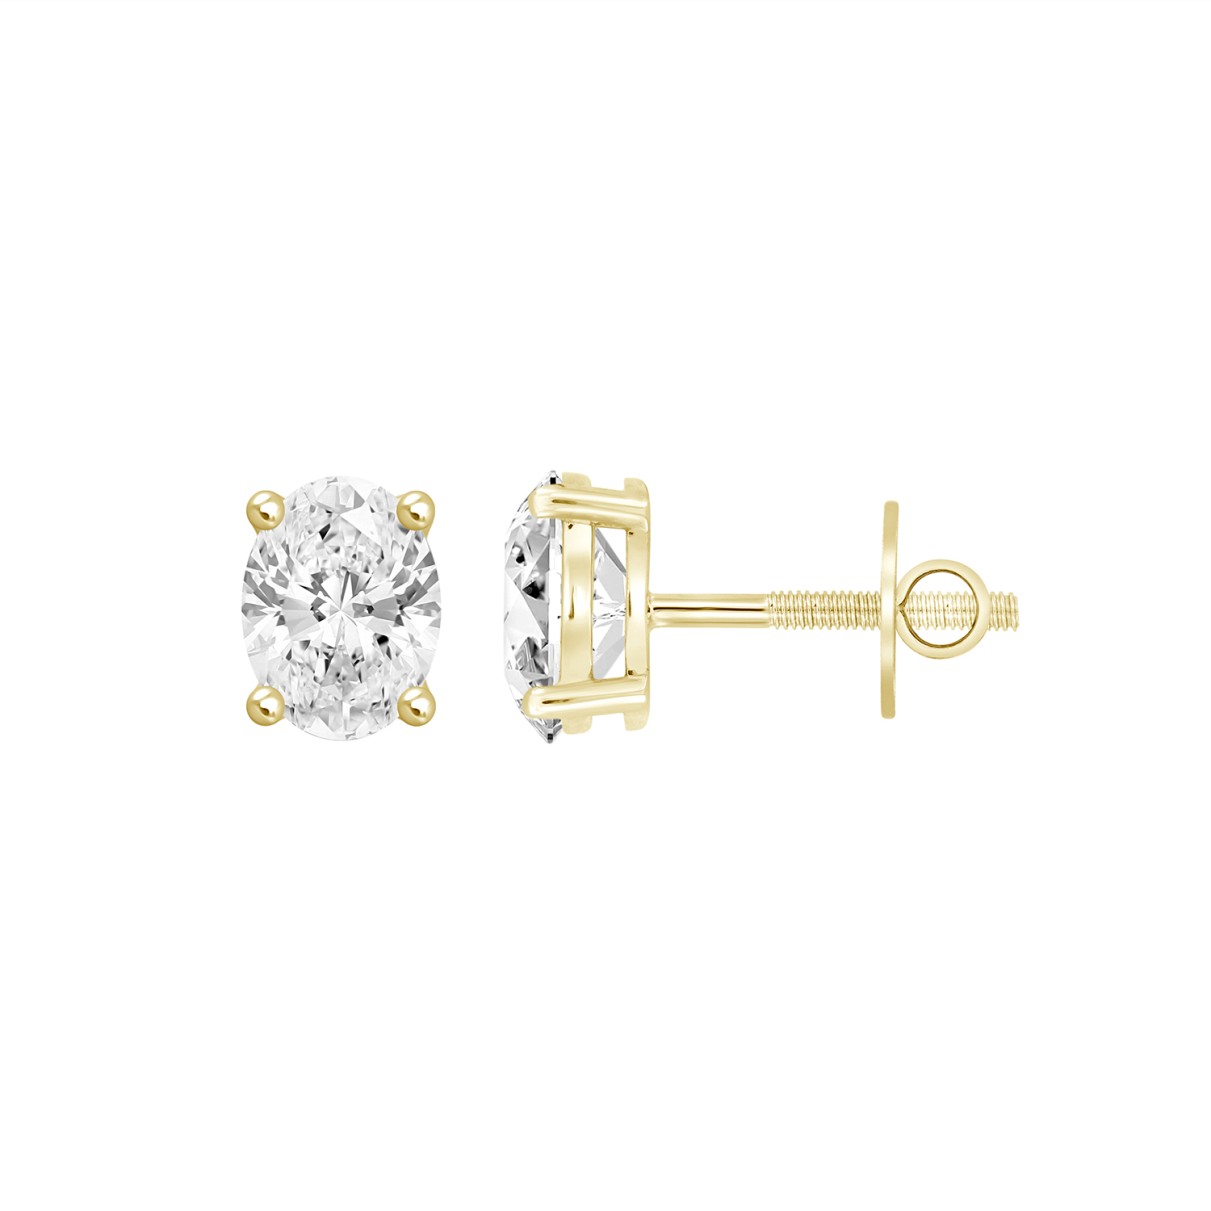 LADIES SOLITAIRE EARRINGS  1 1/2CT OVAL DIAMOND 14K YELLOW GOLD